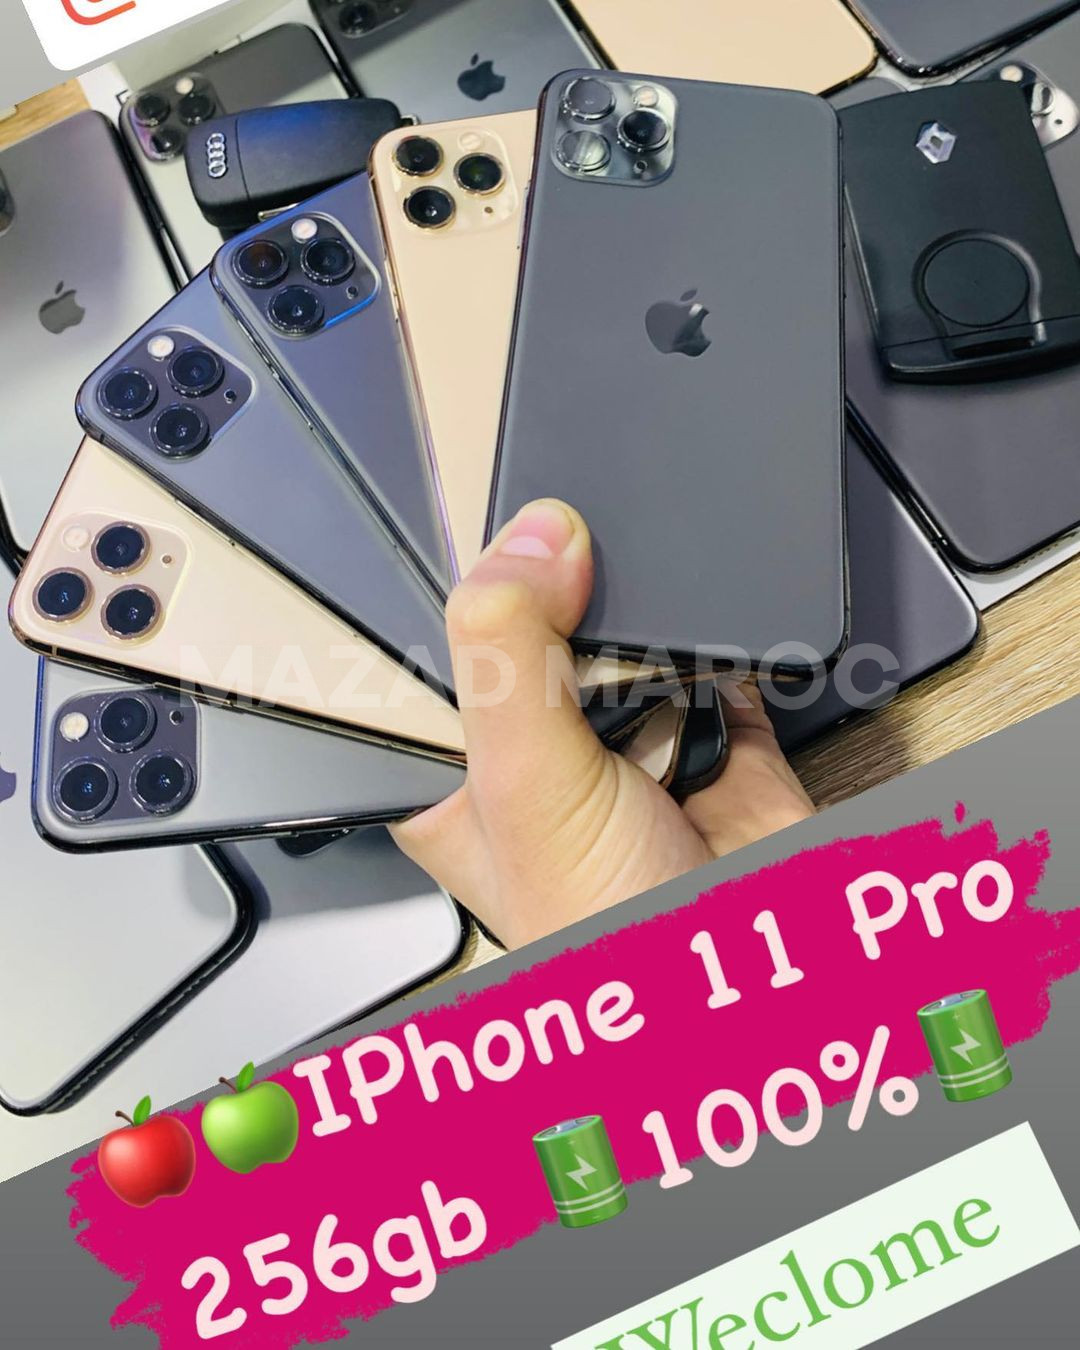 iPhone 11 Pro 128gb  Welcome 100 %